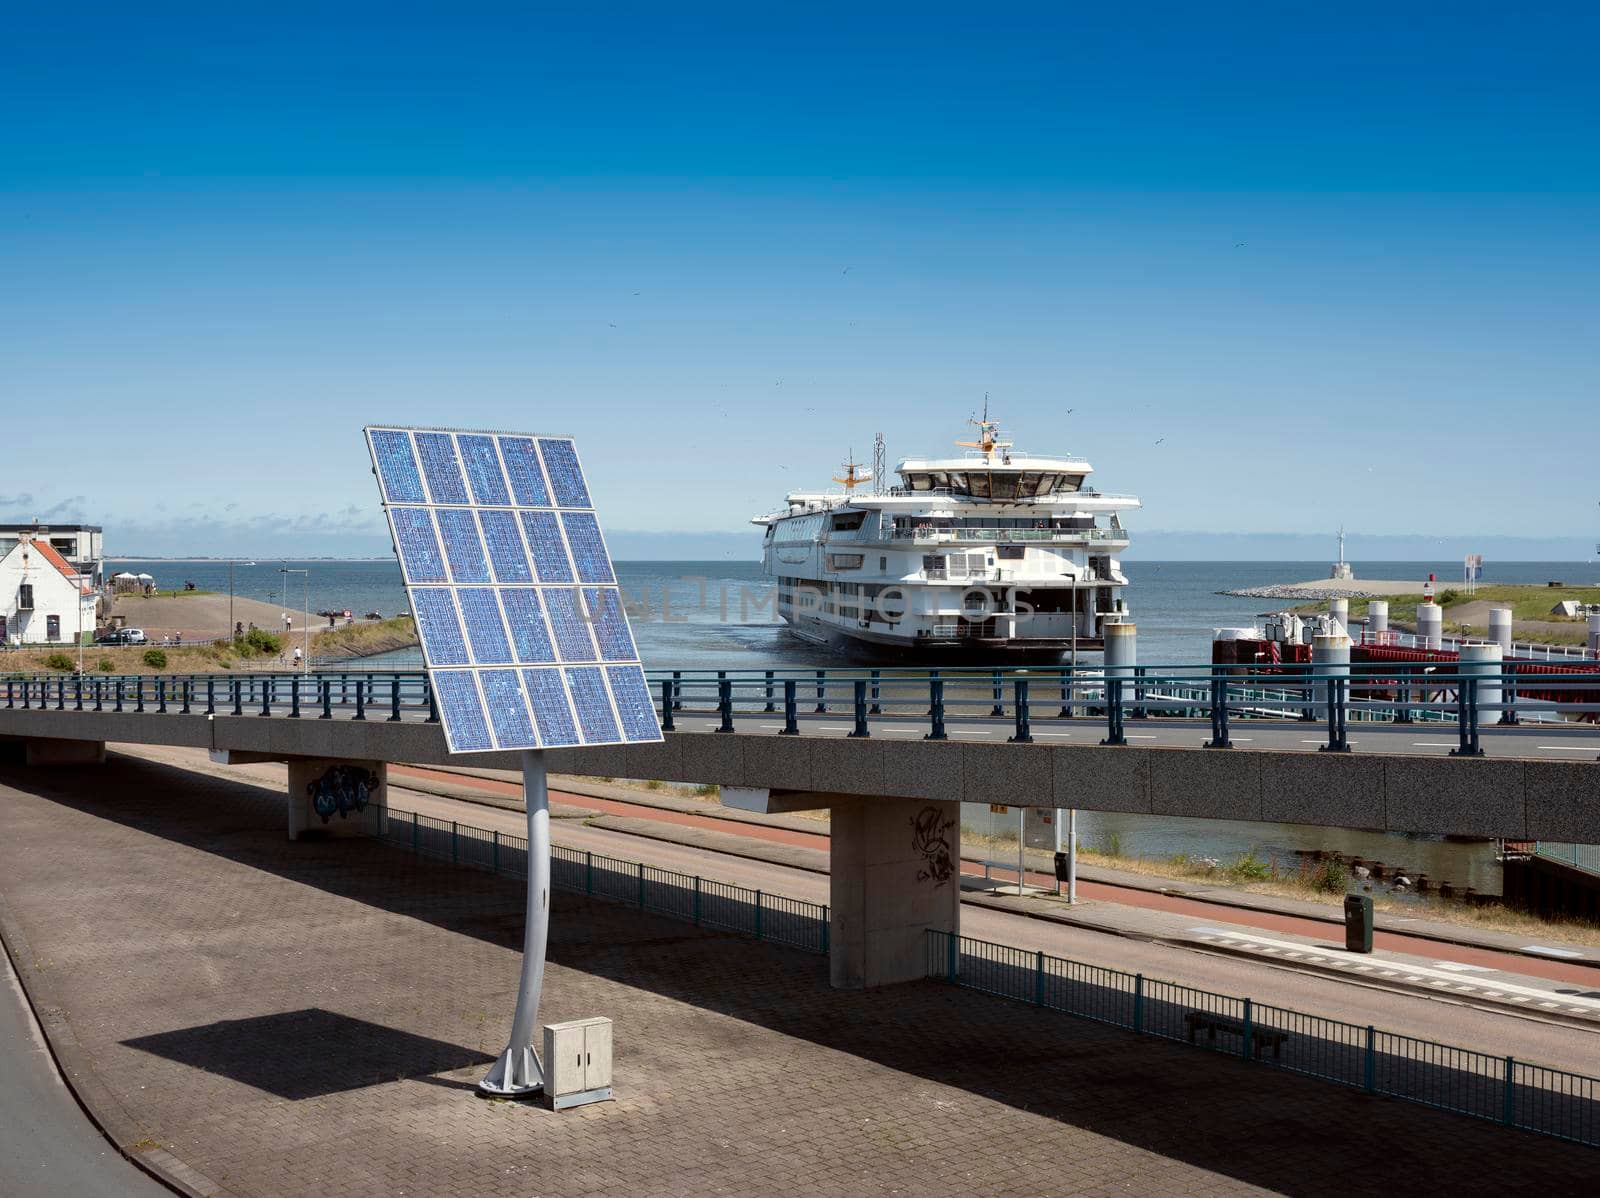 solar panels and arriving ferry from texel at port of den helder in the netherlands under blue sky on sunny summer day